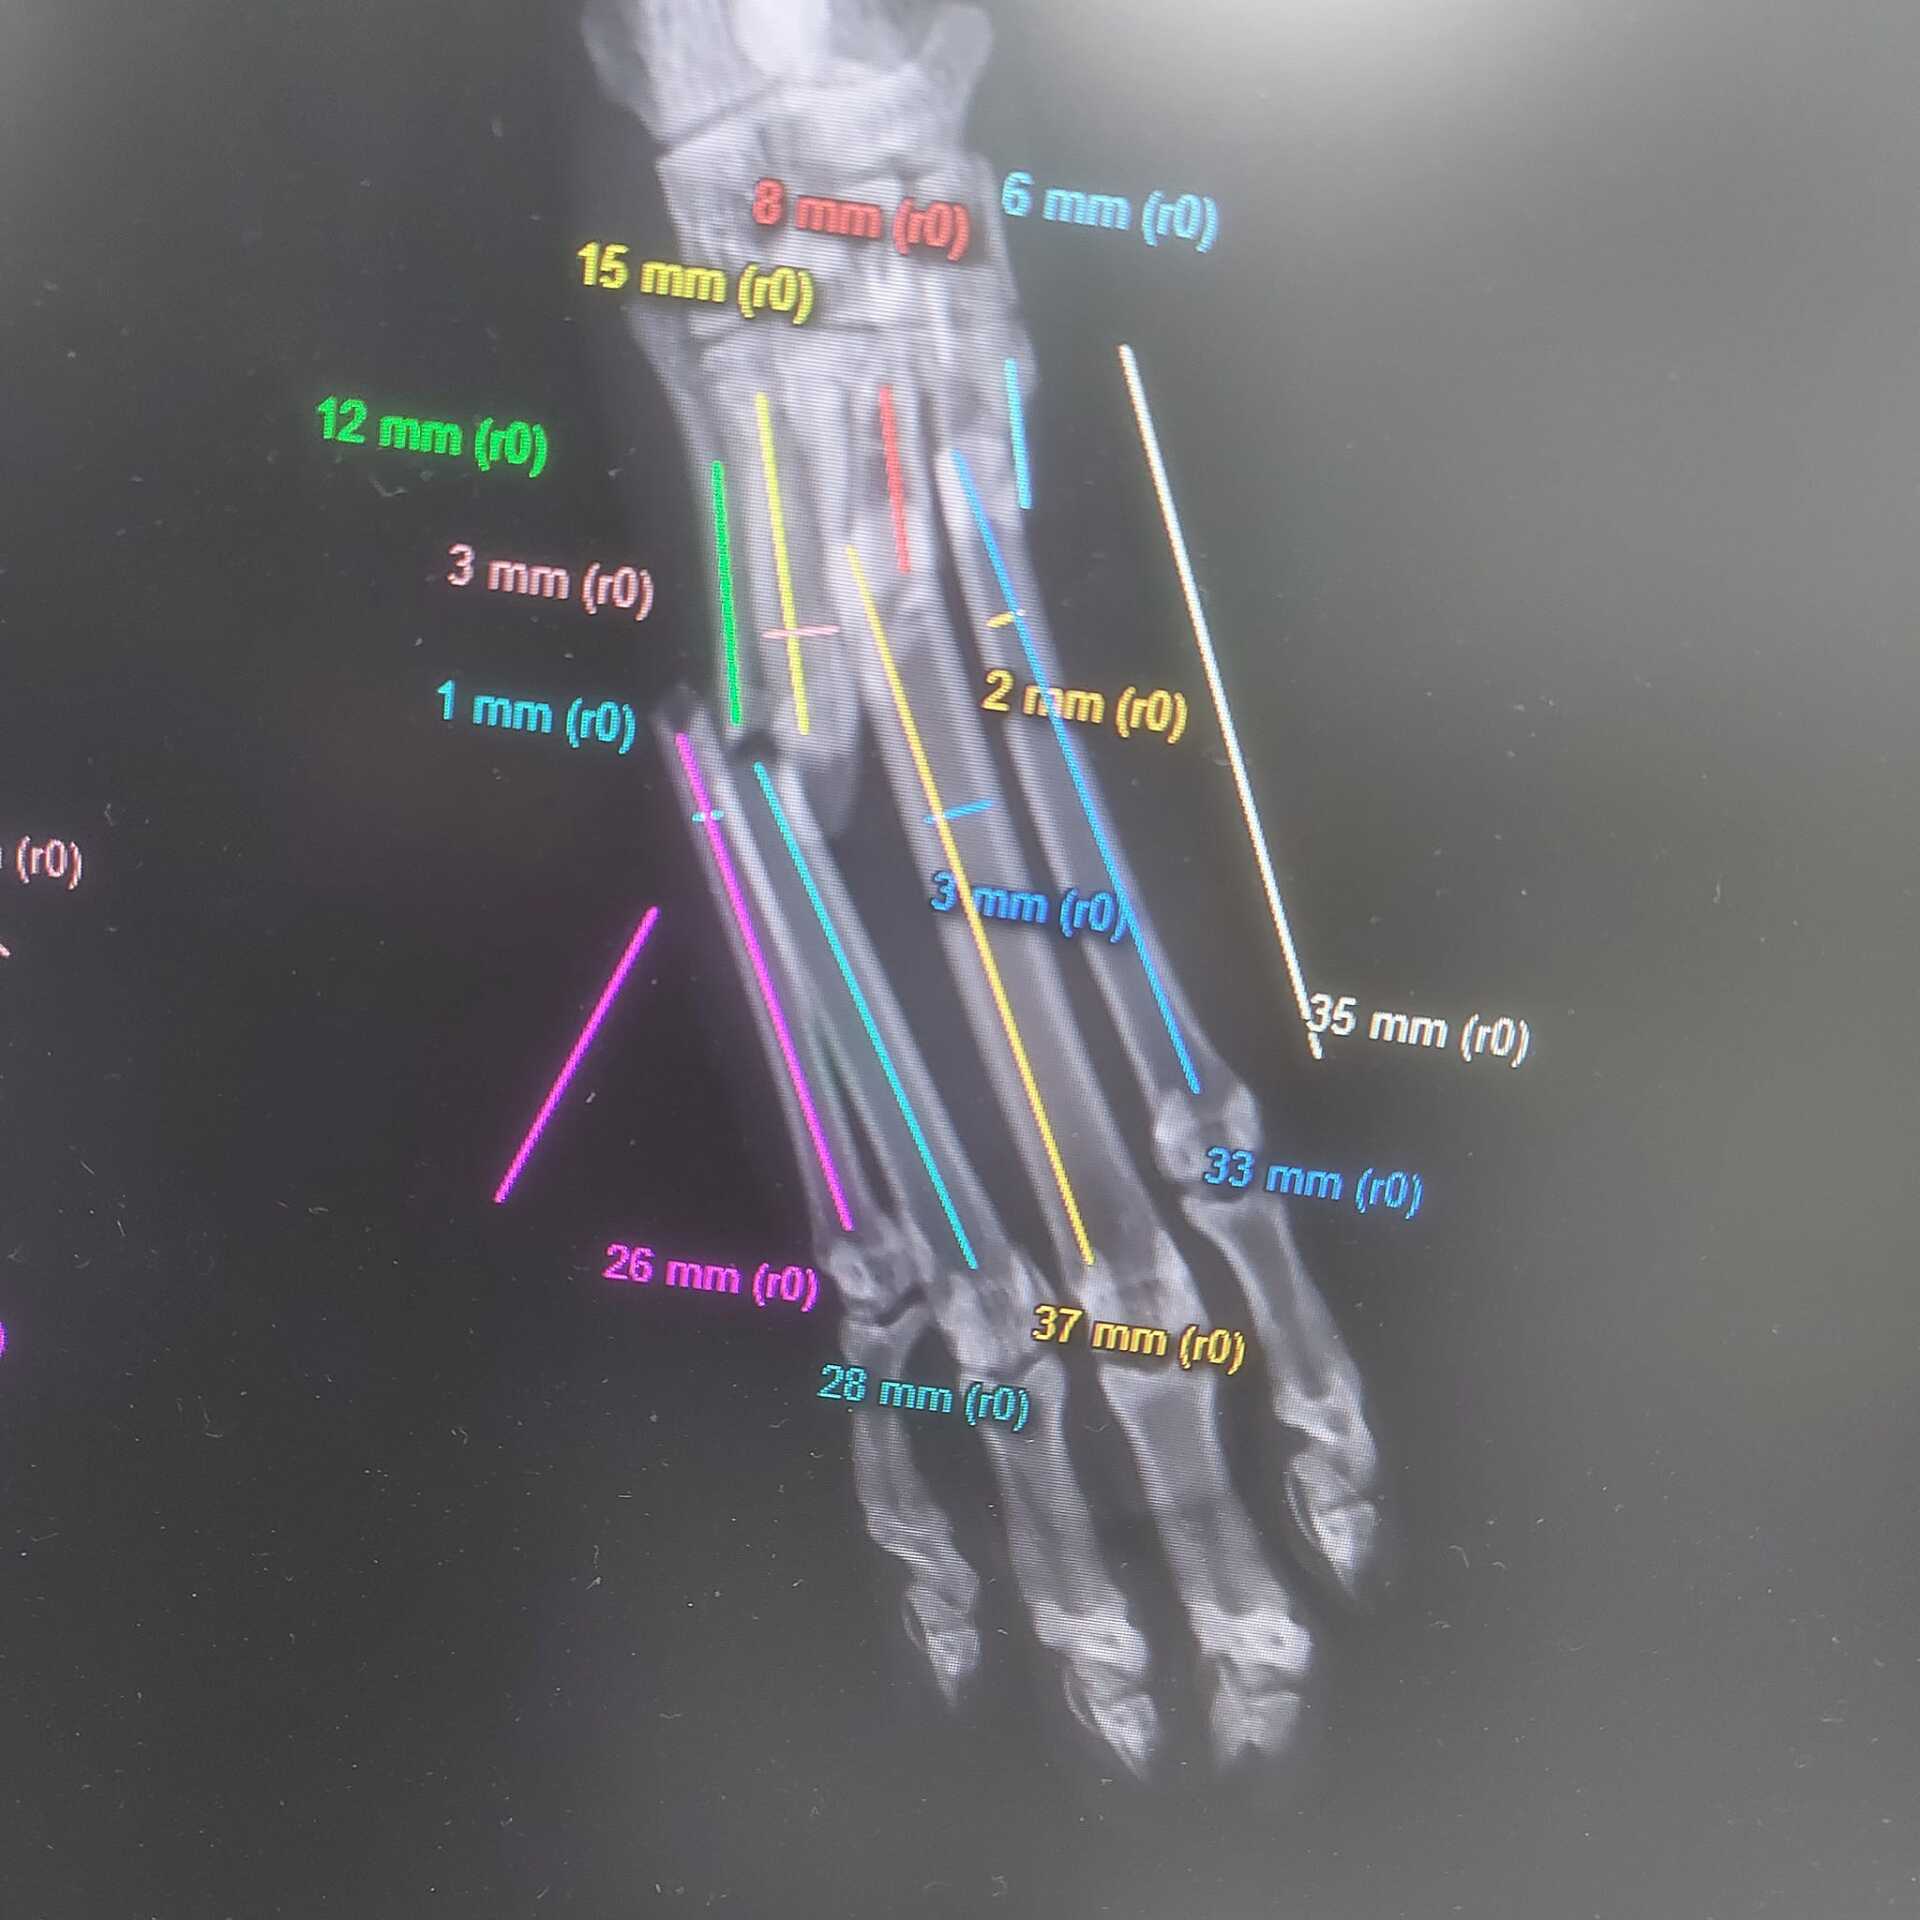 Metatarsal fractures in a cat (1)